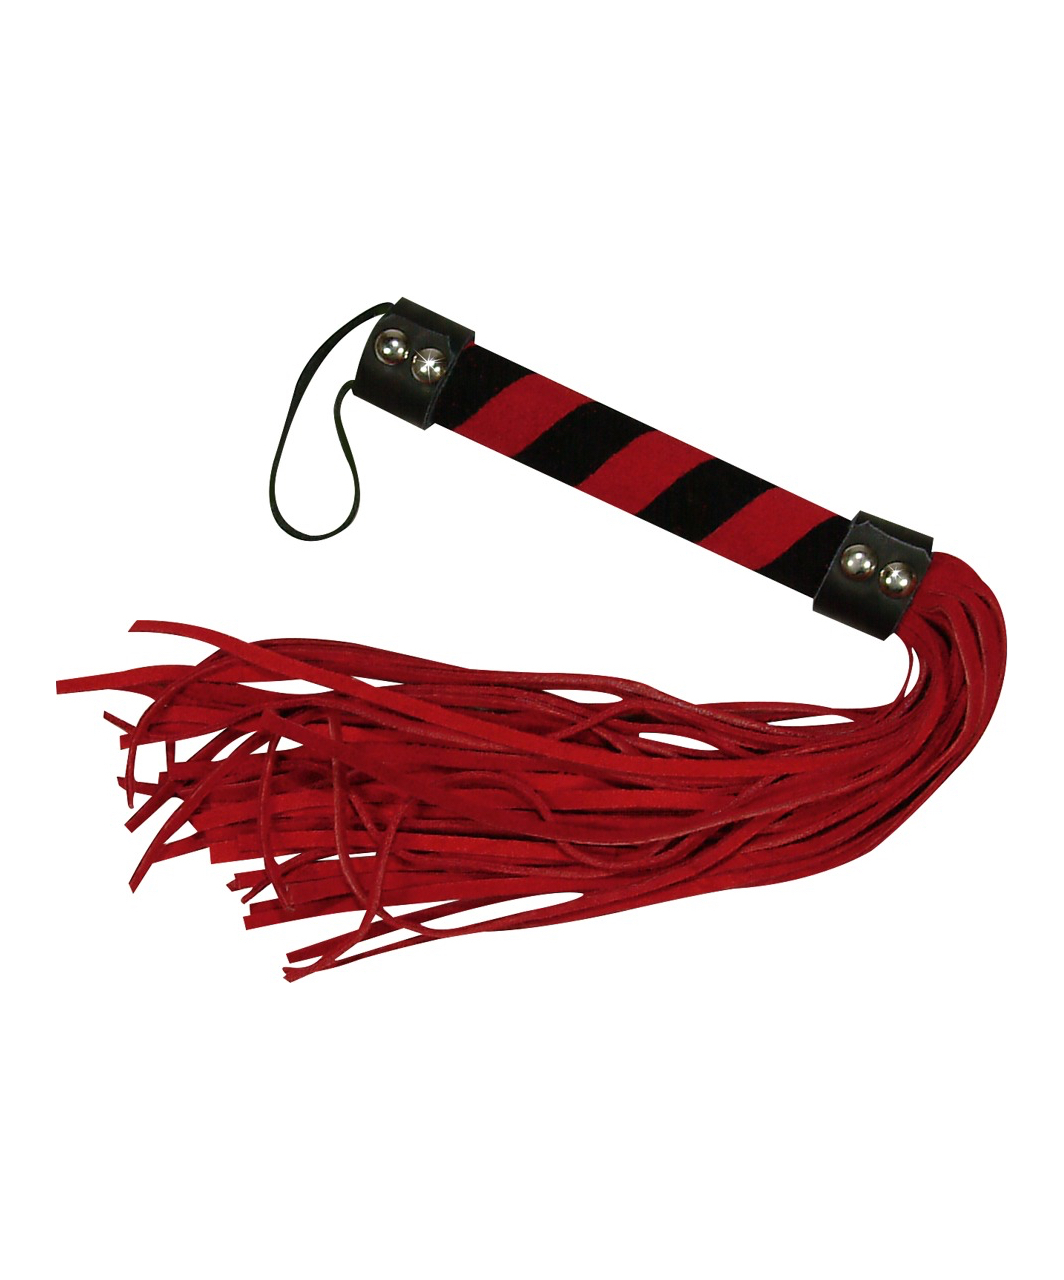 Bad Kitty faux suede whip